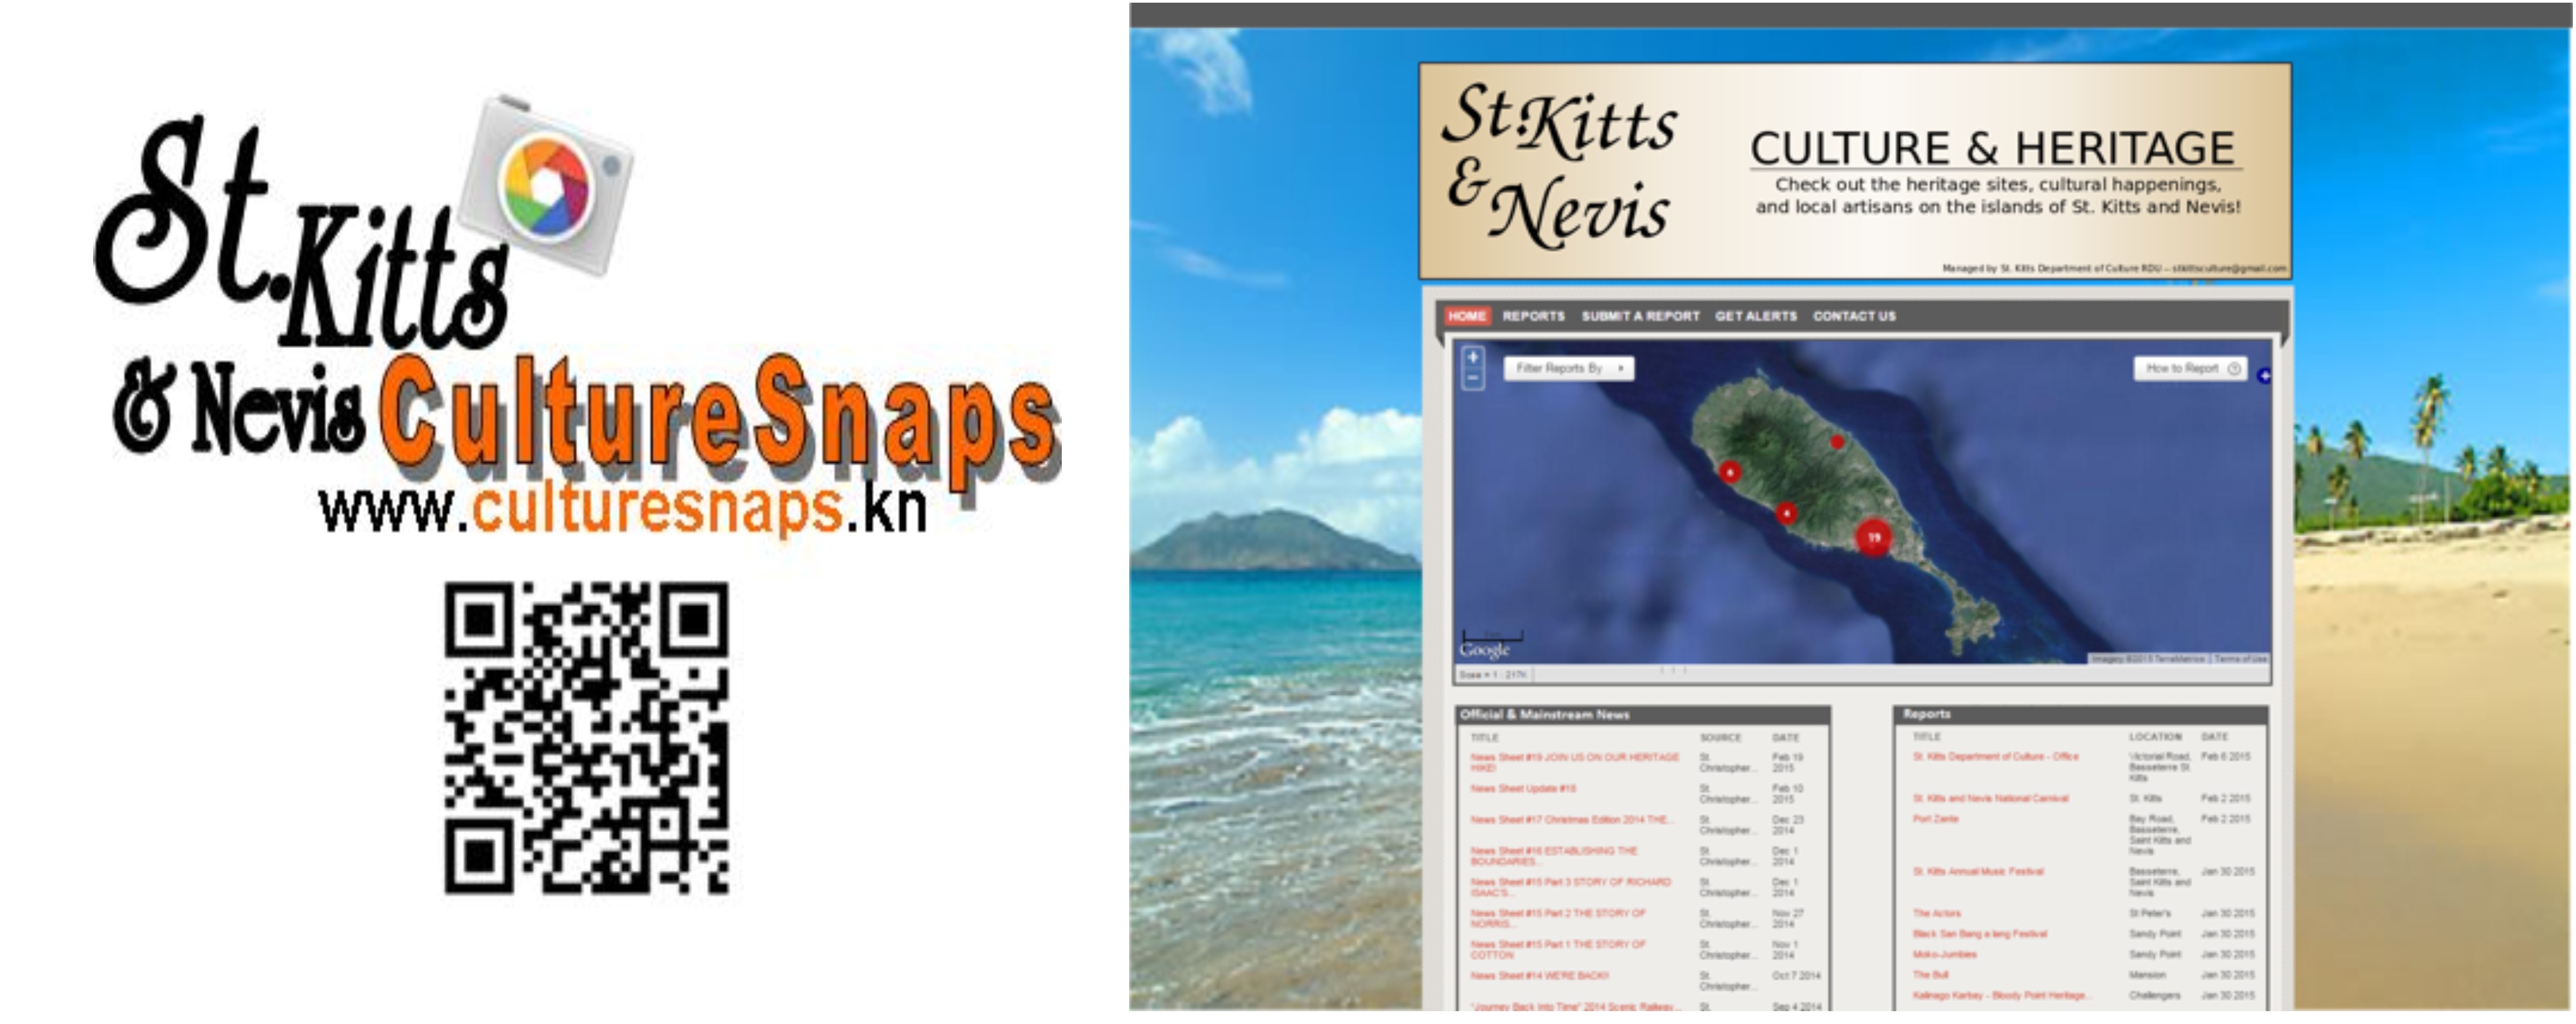 WWW.CULTURESNAPS.KN  Search for local attractions & ICH (food products crafts)